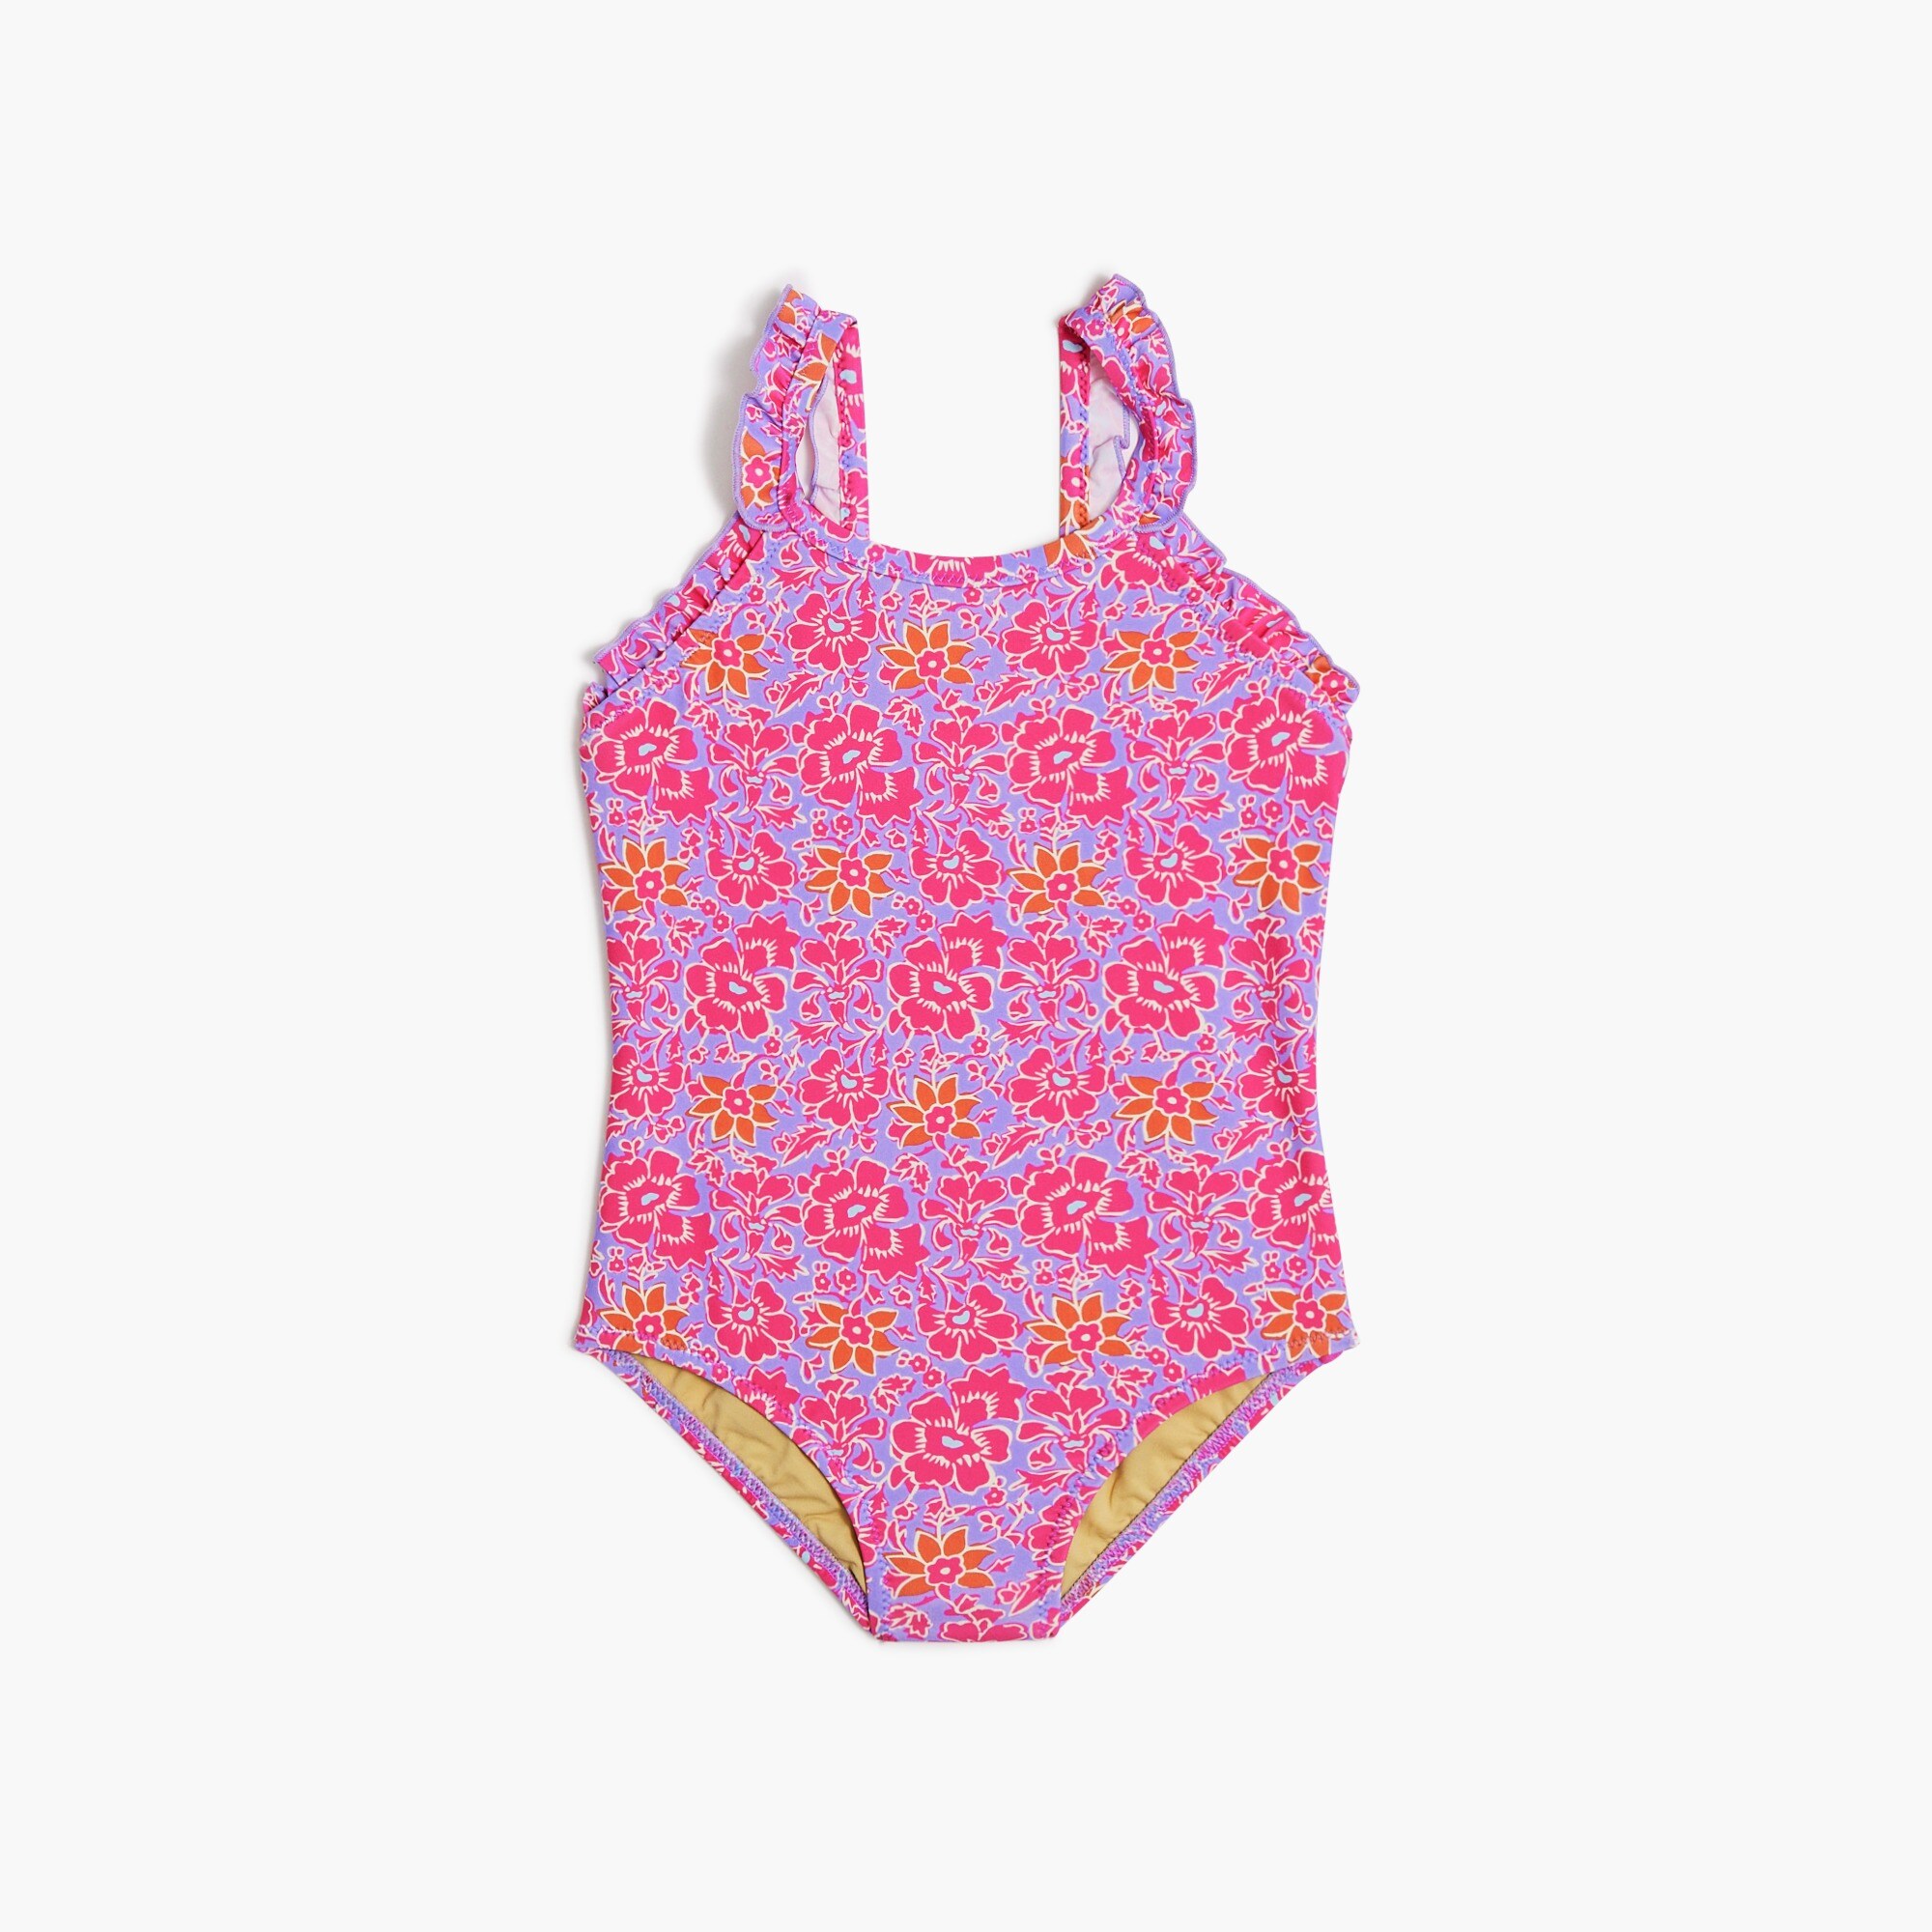  Girls' floral ruffle one-piece swimsuit